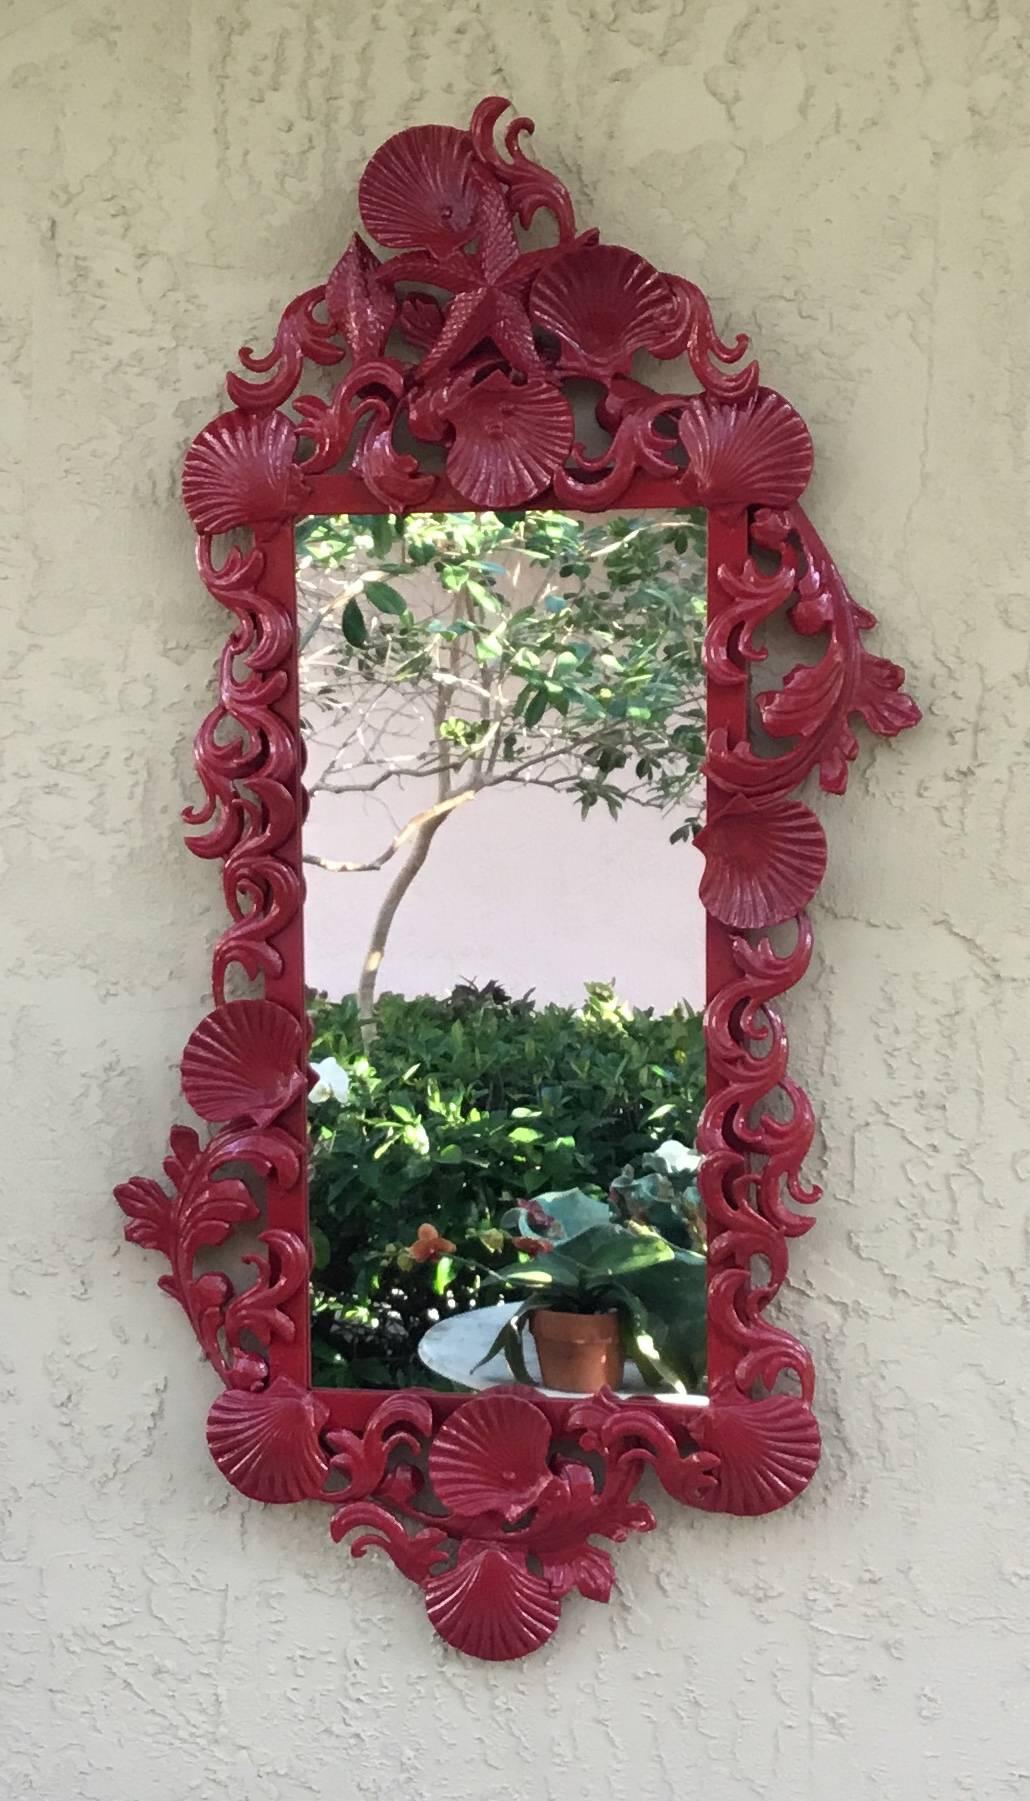 Exceptional pair of mirrors made of iron, artistically decorated with seashell and sea star motifs, painted with vibrant red lacquer color.
Will sell single mirror upon request.
Actual mirror size: 22”.5 x 10”25.